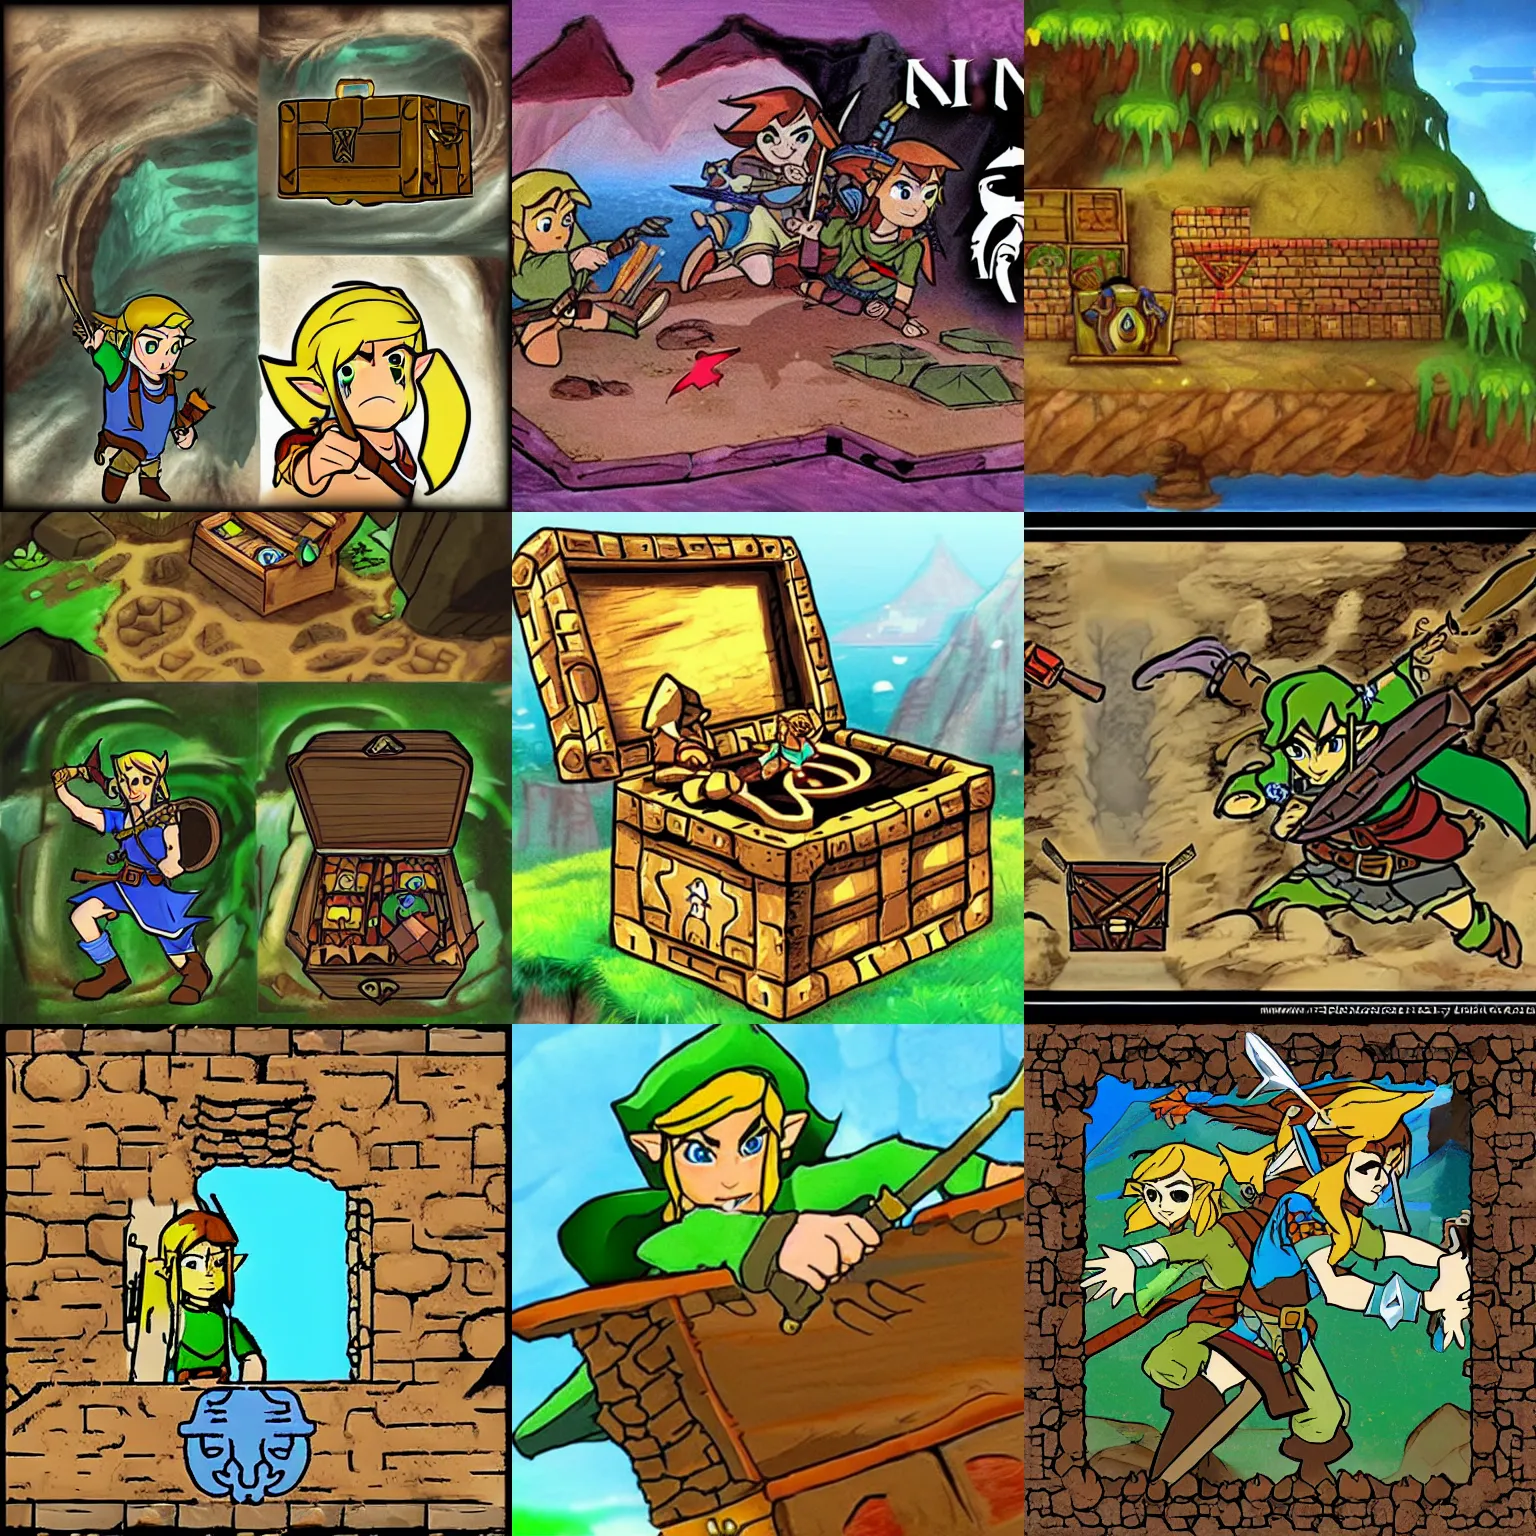 Prompt: link opening treasure chest in a cave, legend of zelda, in the style of ralph bakshi, dungeons and dragons